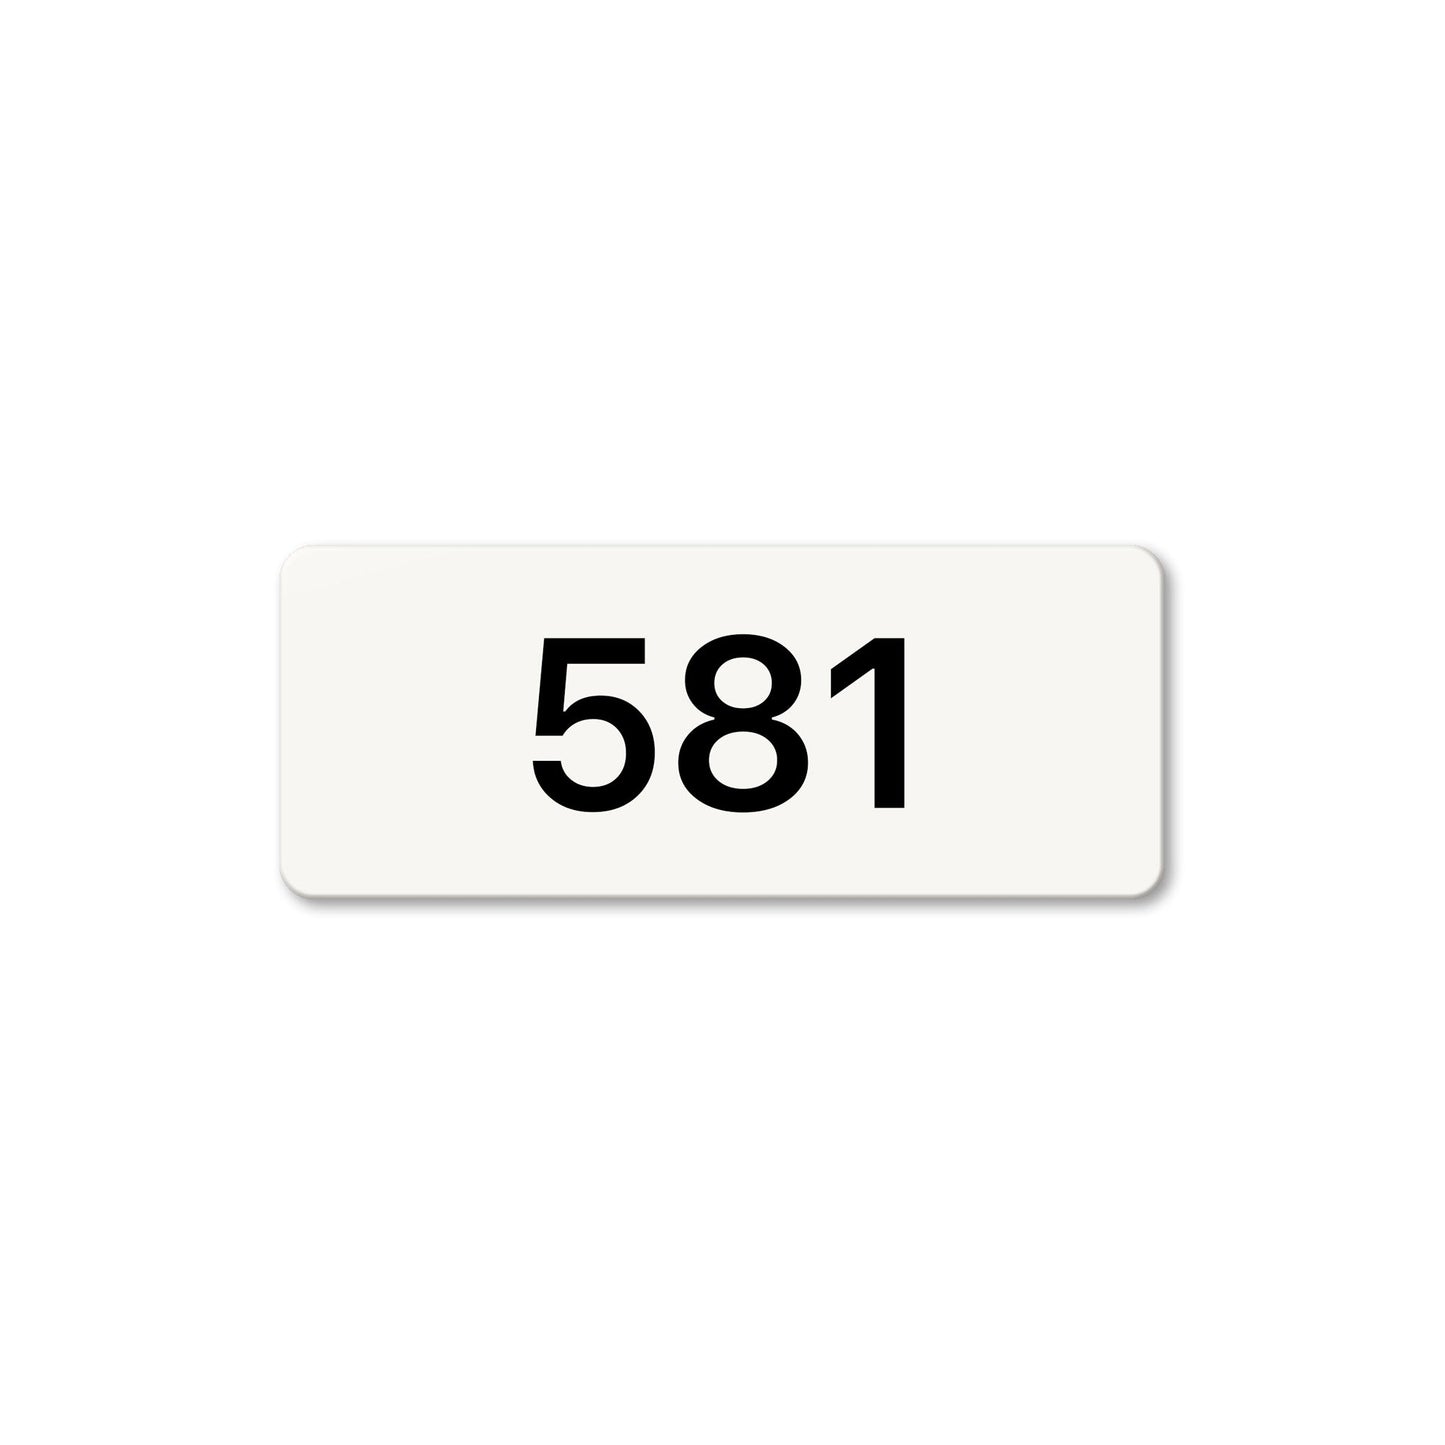 Numeral 581